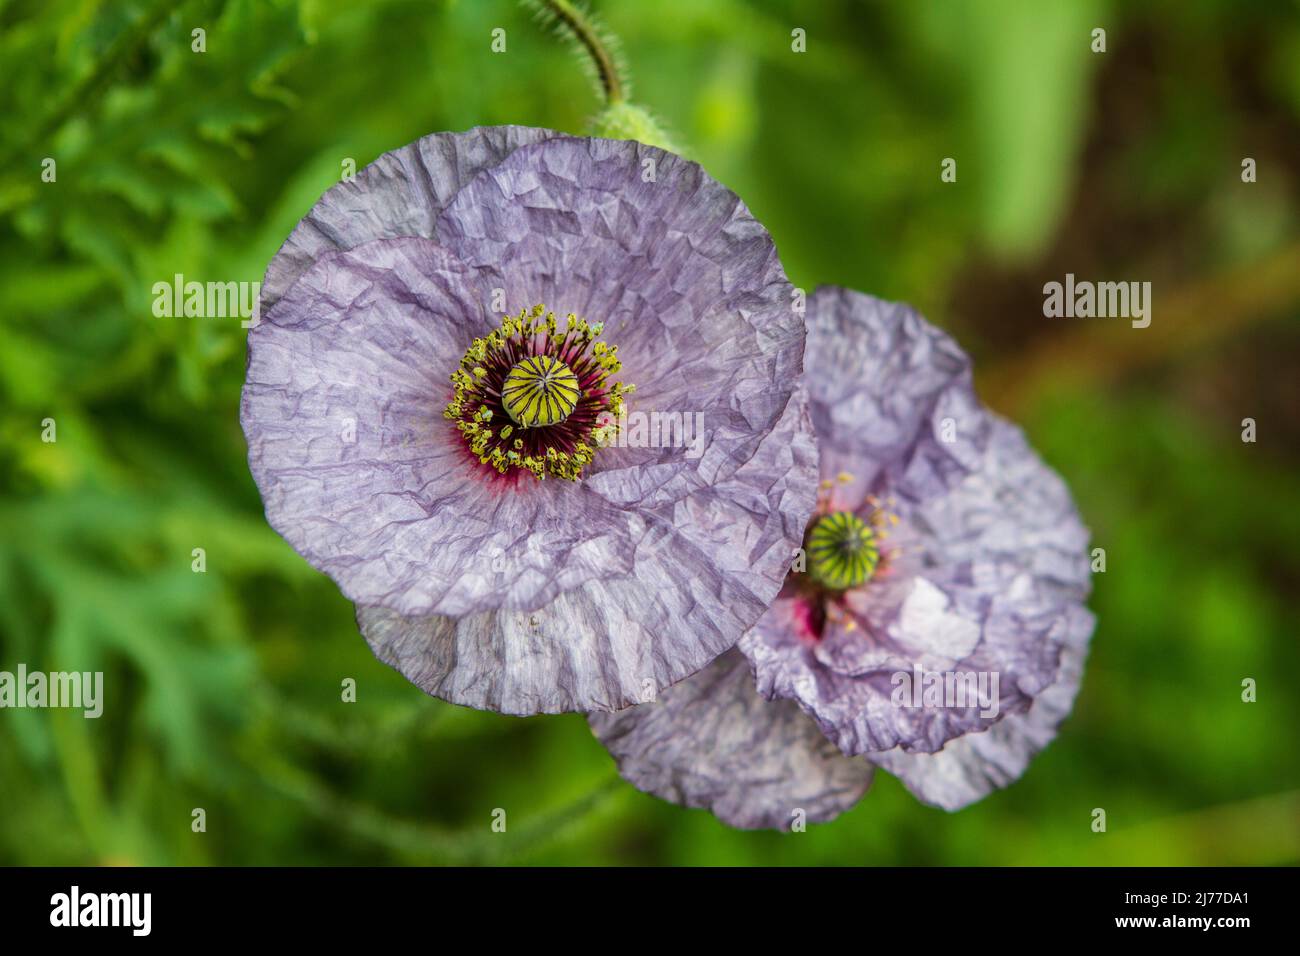 Closeup overhead image of beautiful silver-purple Amazing Grey poppies (Papaver rhoeas) in a summer garden, with bright green soft focus background. Stock Photo